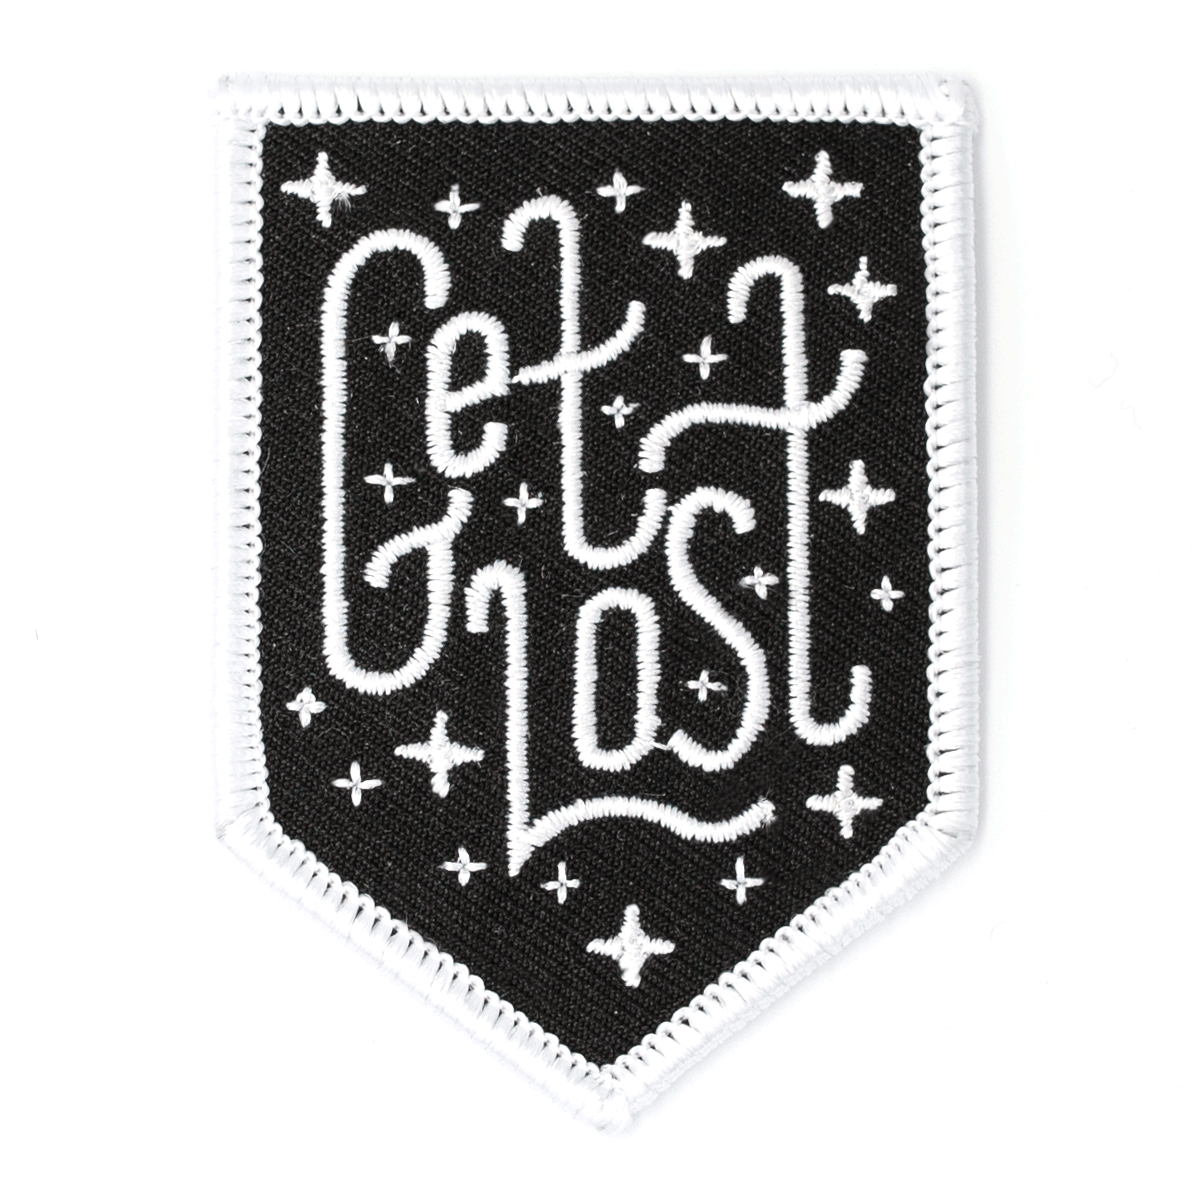 Get Lost Embroidered Iron-On Patch - homesewn